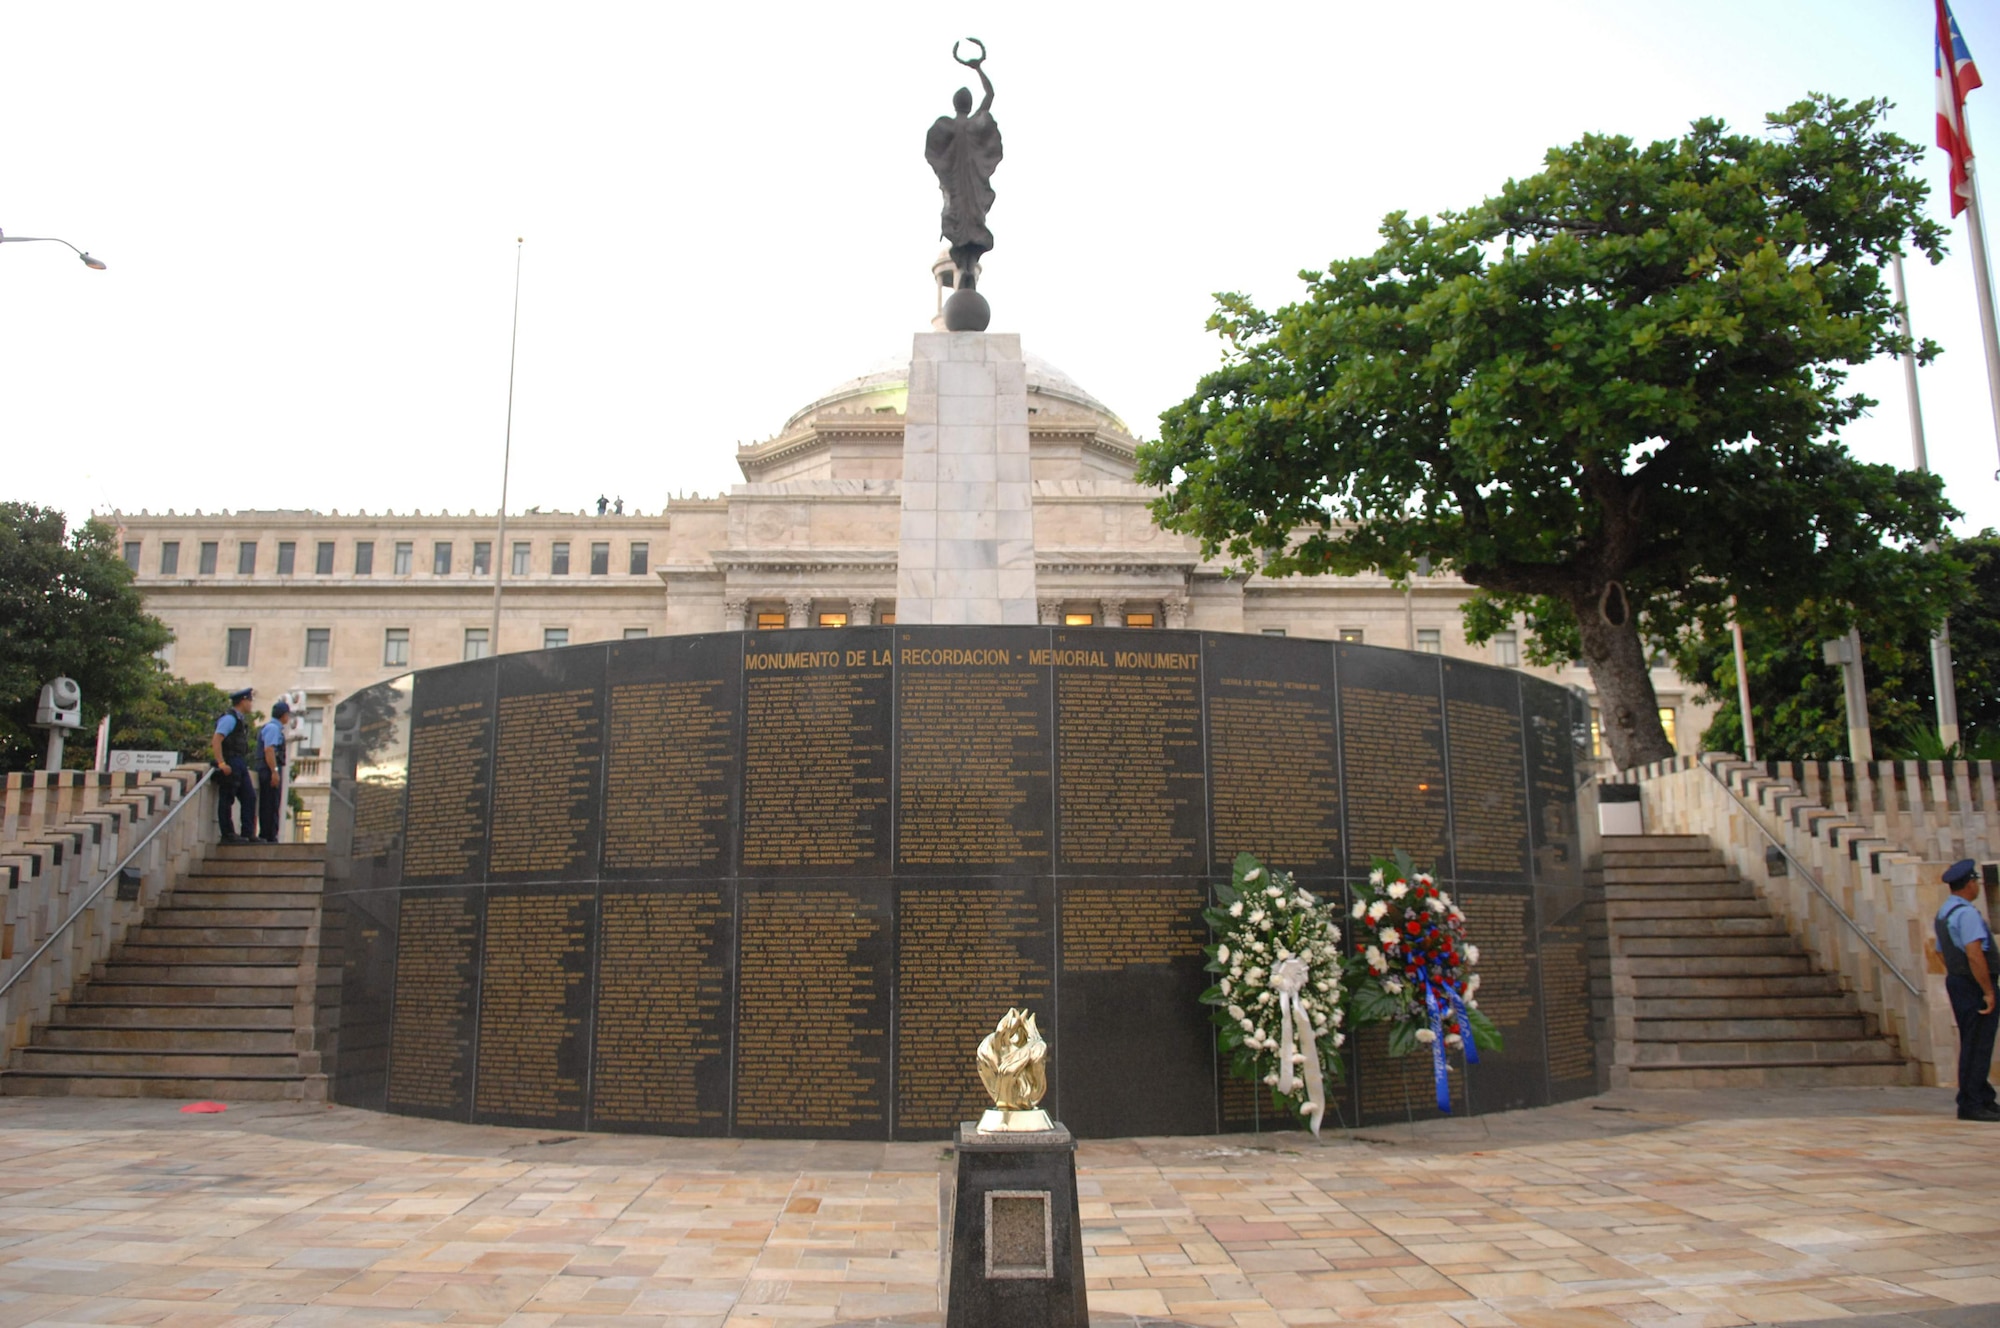 Wreaths placed by the Commonwealth of Puerto Rico and the League of United Latin American Citizens stand in front of El Capitolio 's El Monumento de la Recordacion as part of the Memorial Ceremony in Old San Juan, Puerto Rico, the location of the 2009 LULAC Convention and Exposition July 14 at San Juan, Puerto Rico. LULAC is the nation's oldest and largest Hispanic organization advocating for Latinos in the United States for 80 years. (U.S. Air Force Photo/Tech. Sgt. Francisco V. Govea II)